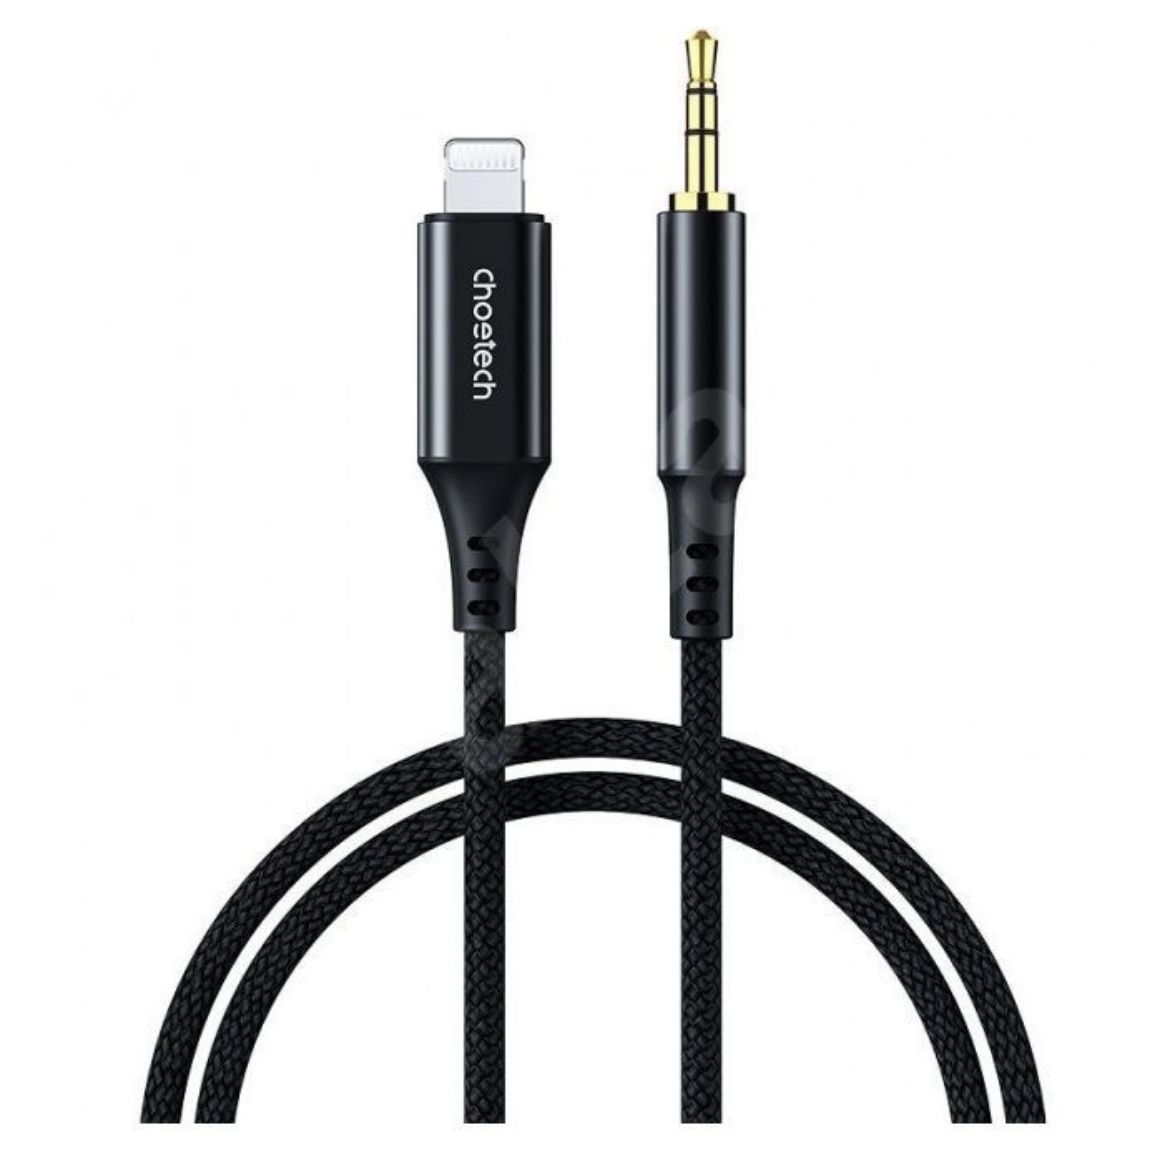 Picture of Choetech Lighting to 3.5mm DC Audio Cable - Black